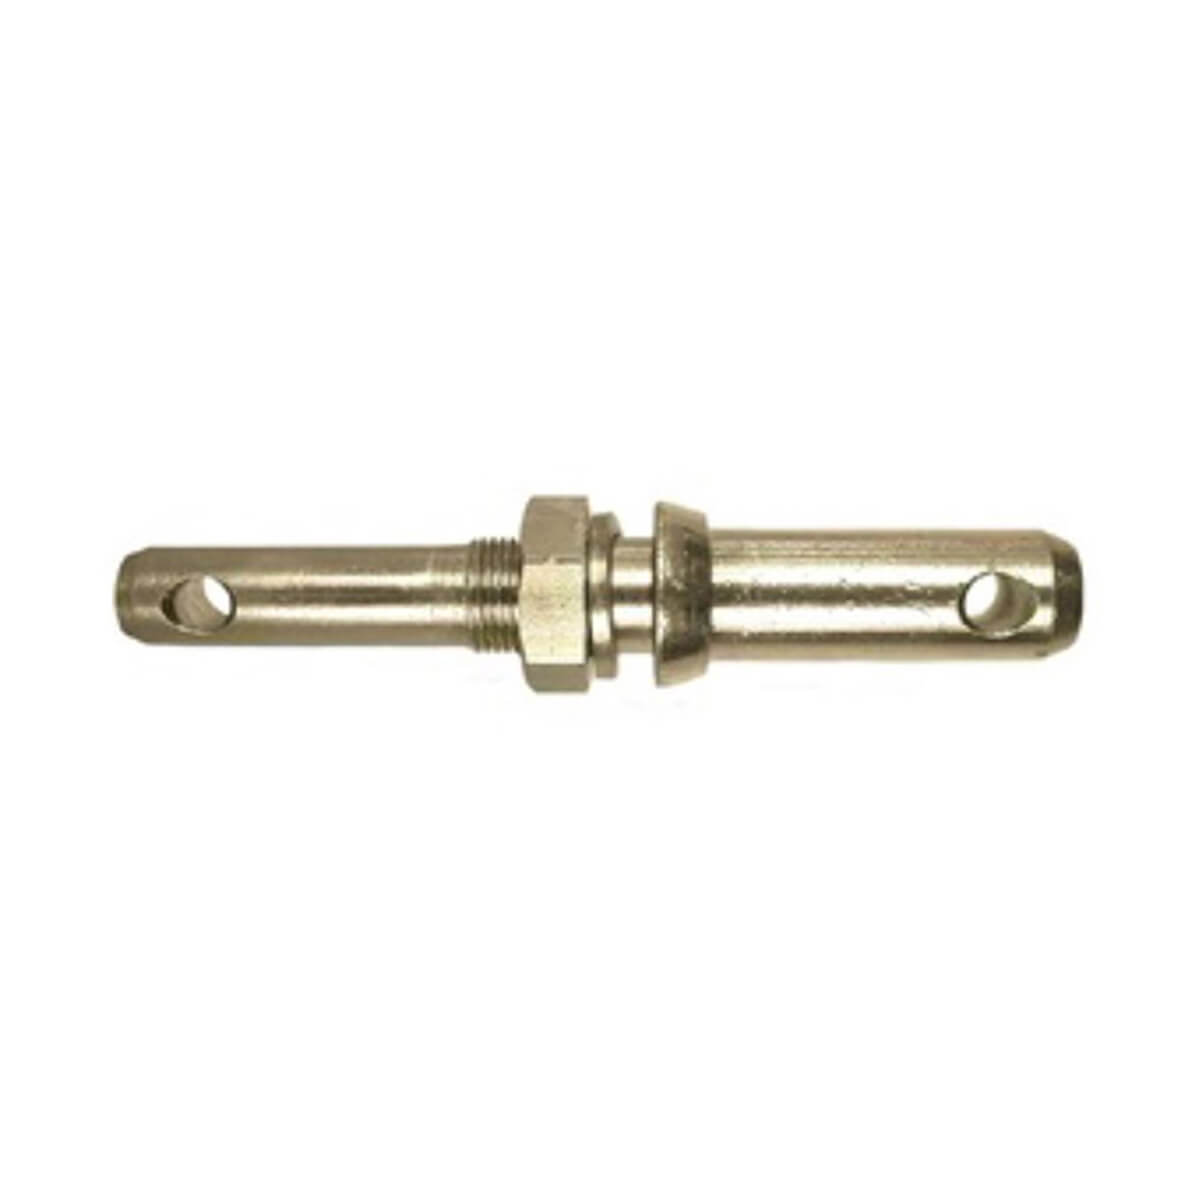 Category 1 Forged Lift Arm Pin - 2-1/4-in